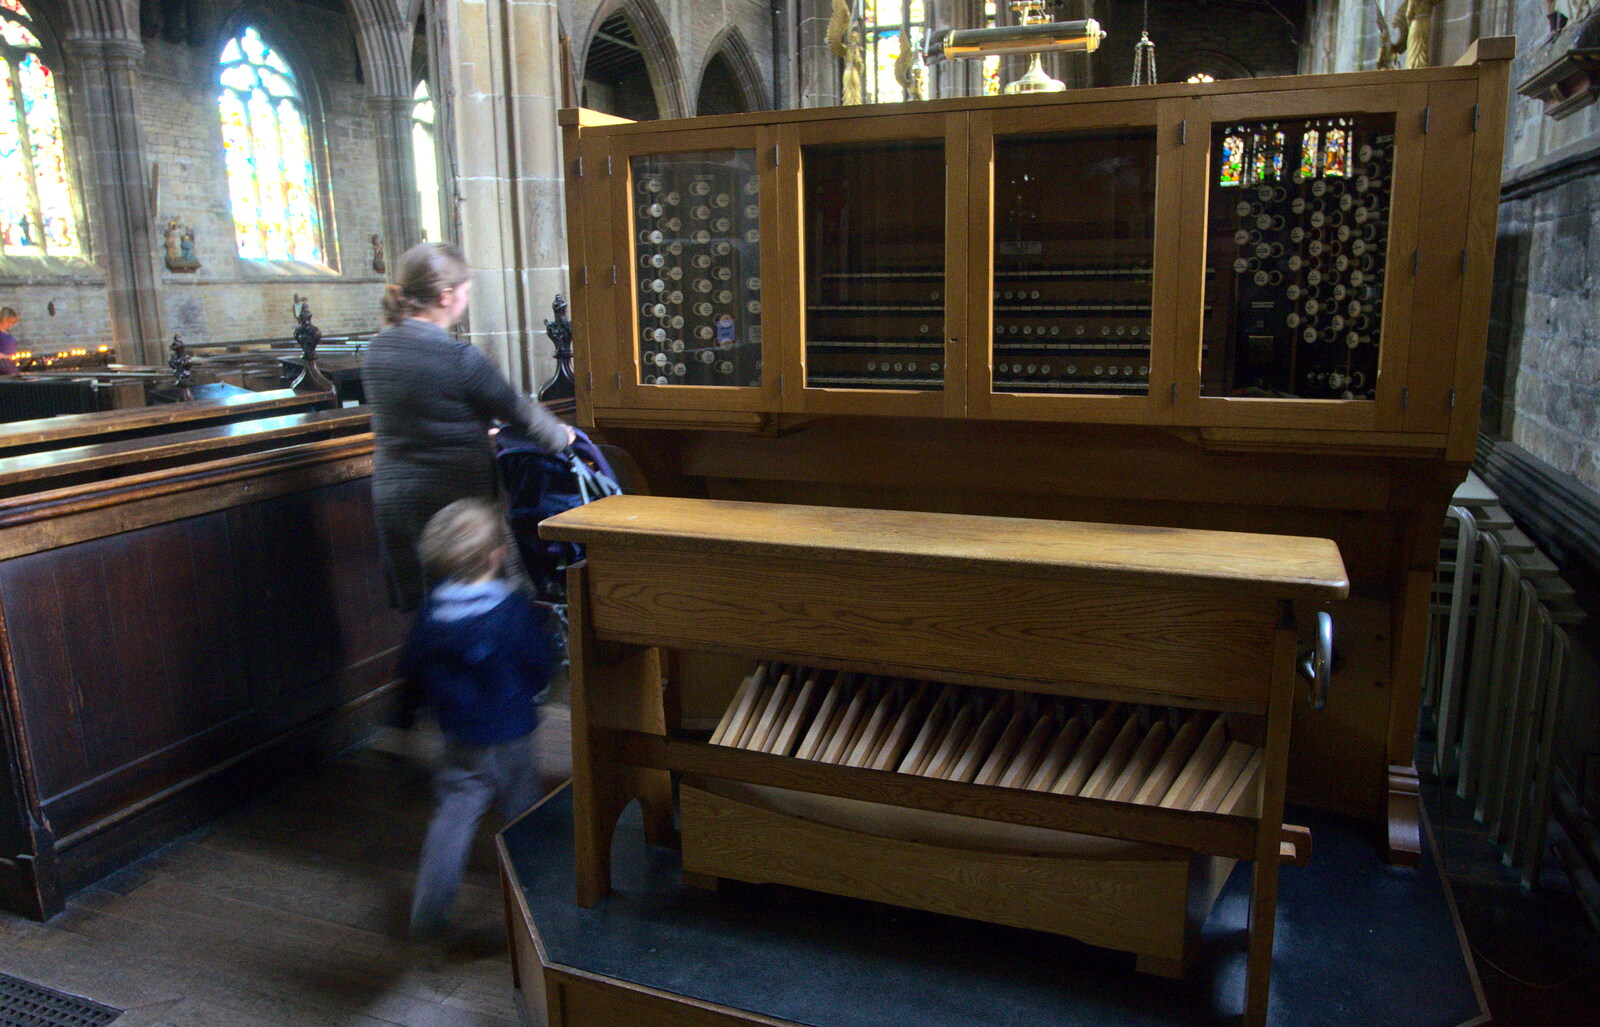 The T. C. Lewis organ from Chesterfield and the Twisty Spire, Derbyshire - 19th April 2013